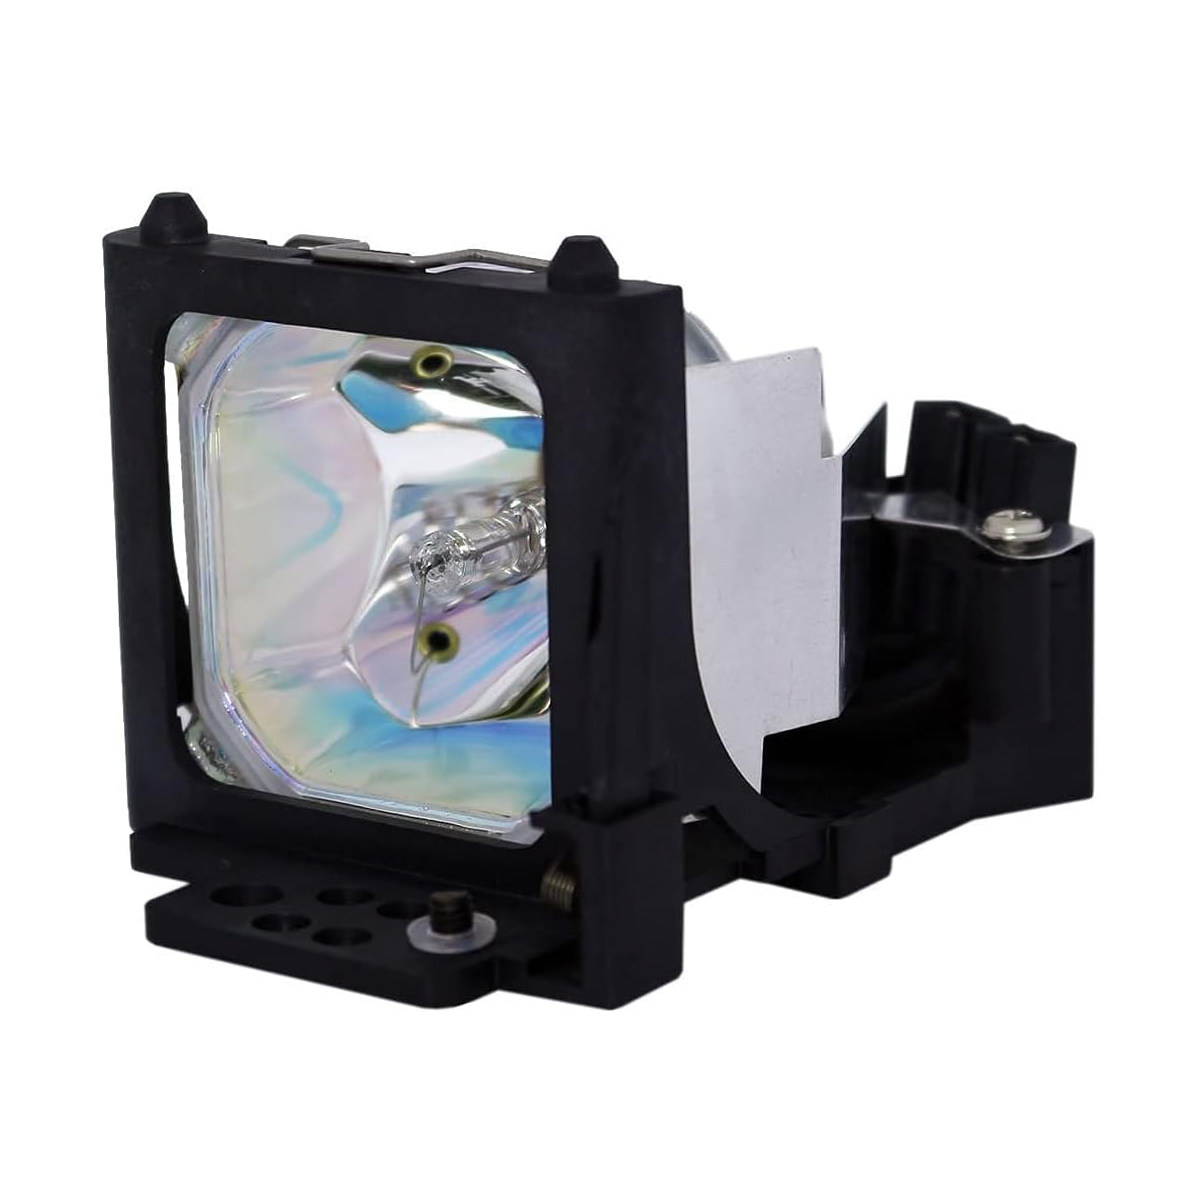 Replacement Projector lamp 456-214 For Dukane Projector